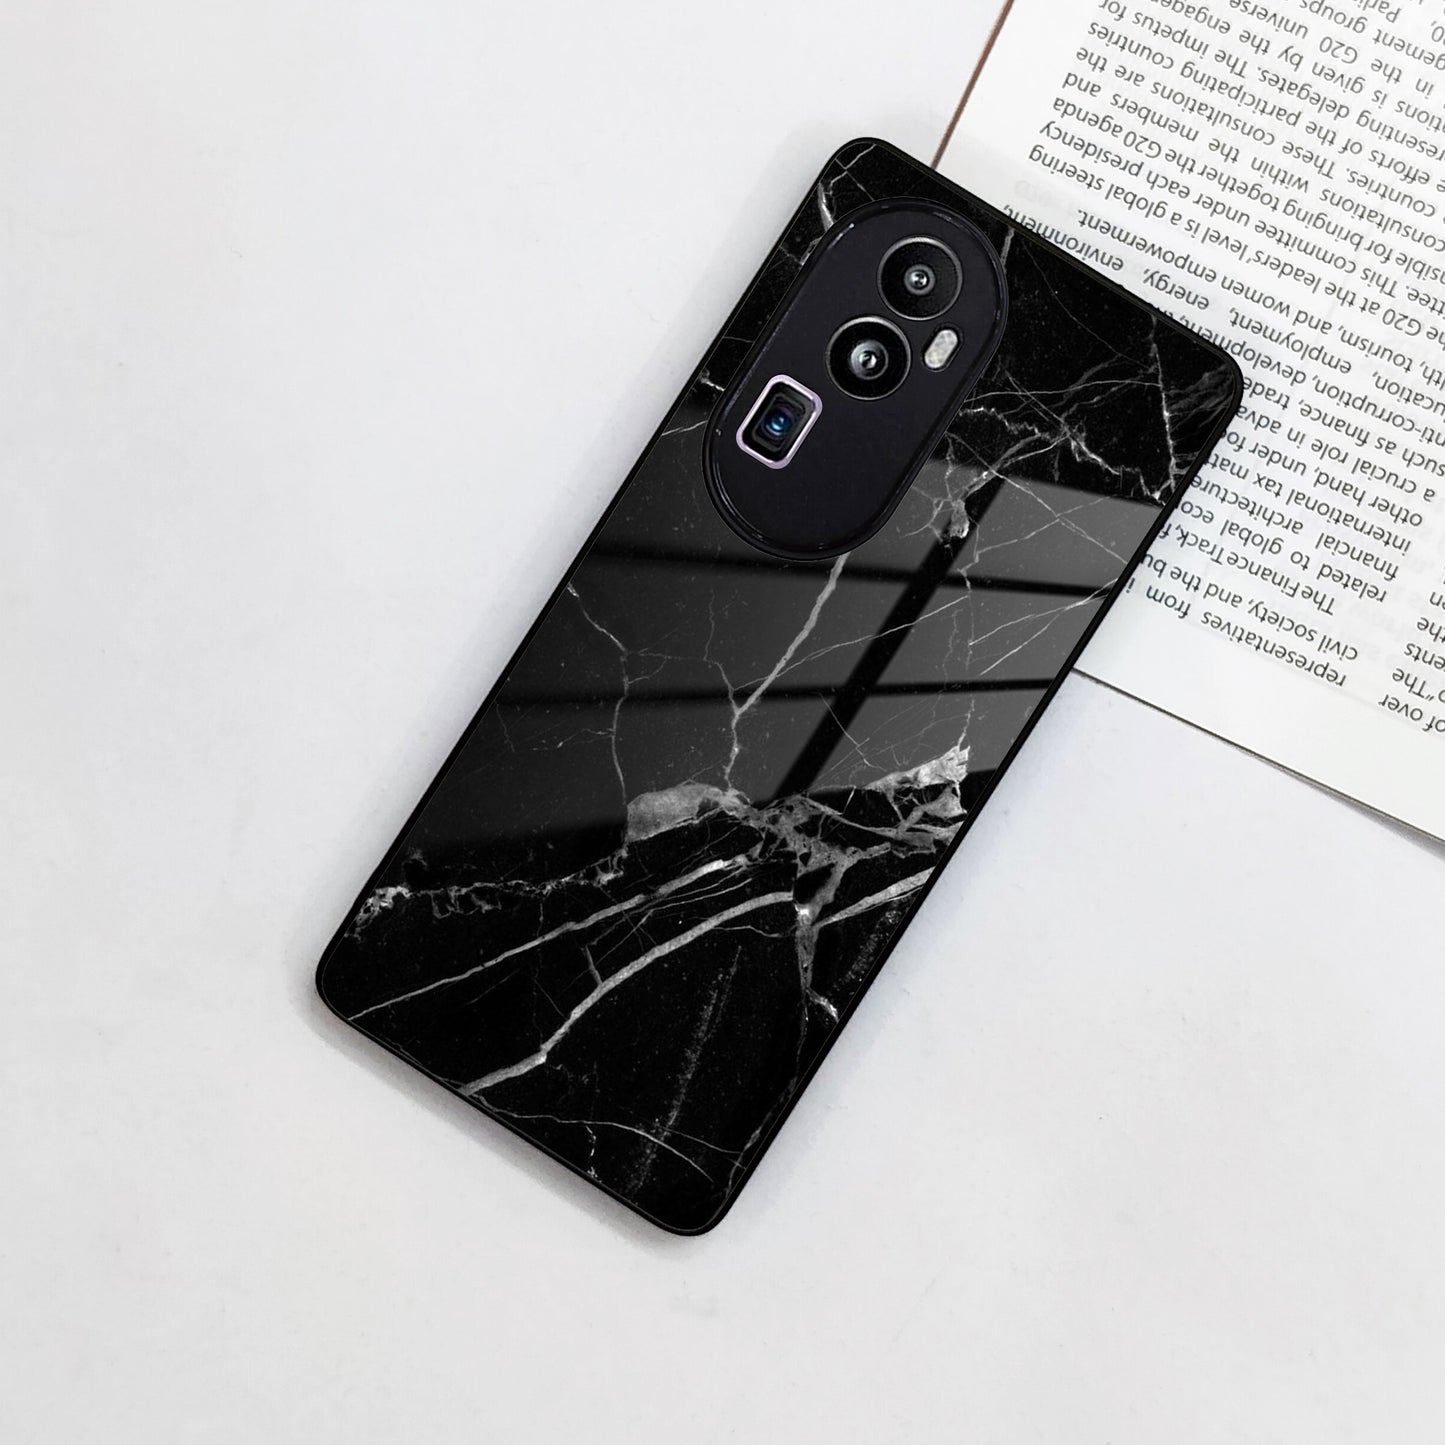 Black Marble Patter Glass Case Cover For Oppo